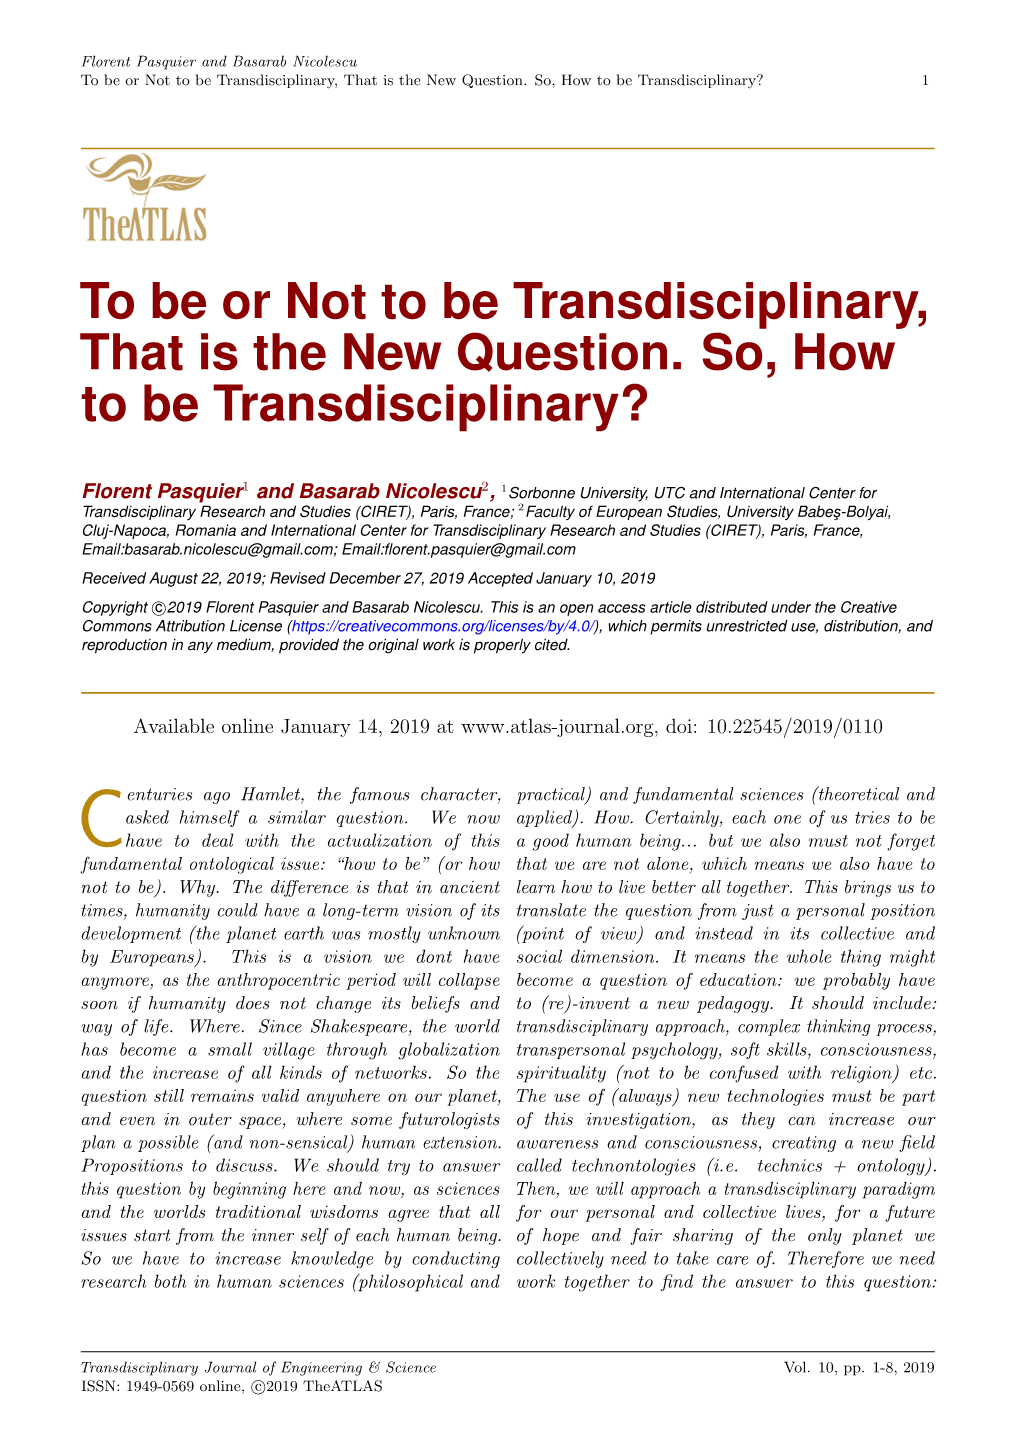 To Be Or Not to Be Transdisciplinary, That Is the New Question. So, How to Be Transdisciplinary? 1